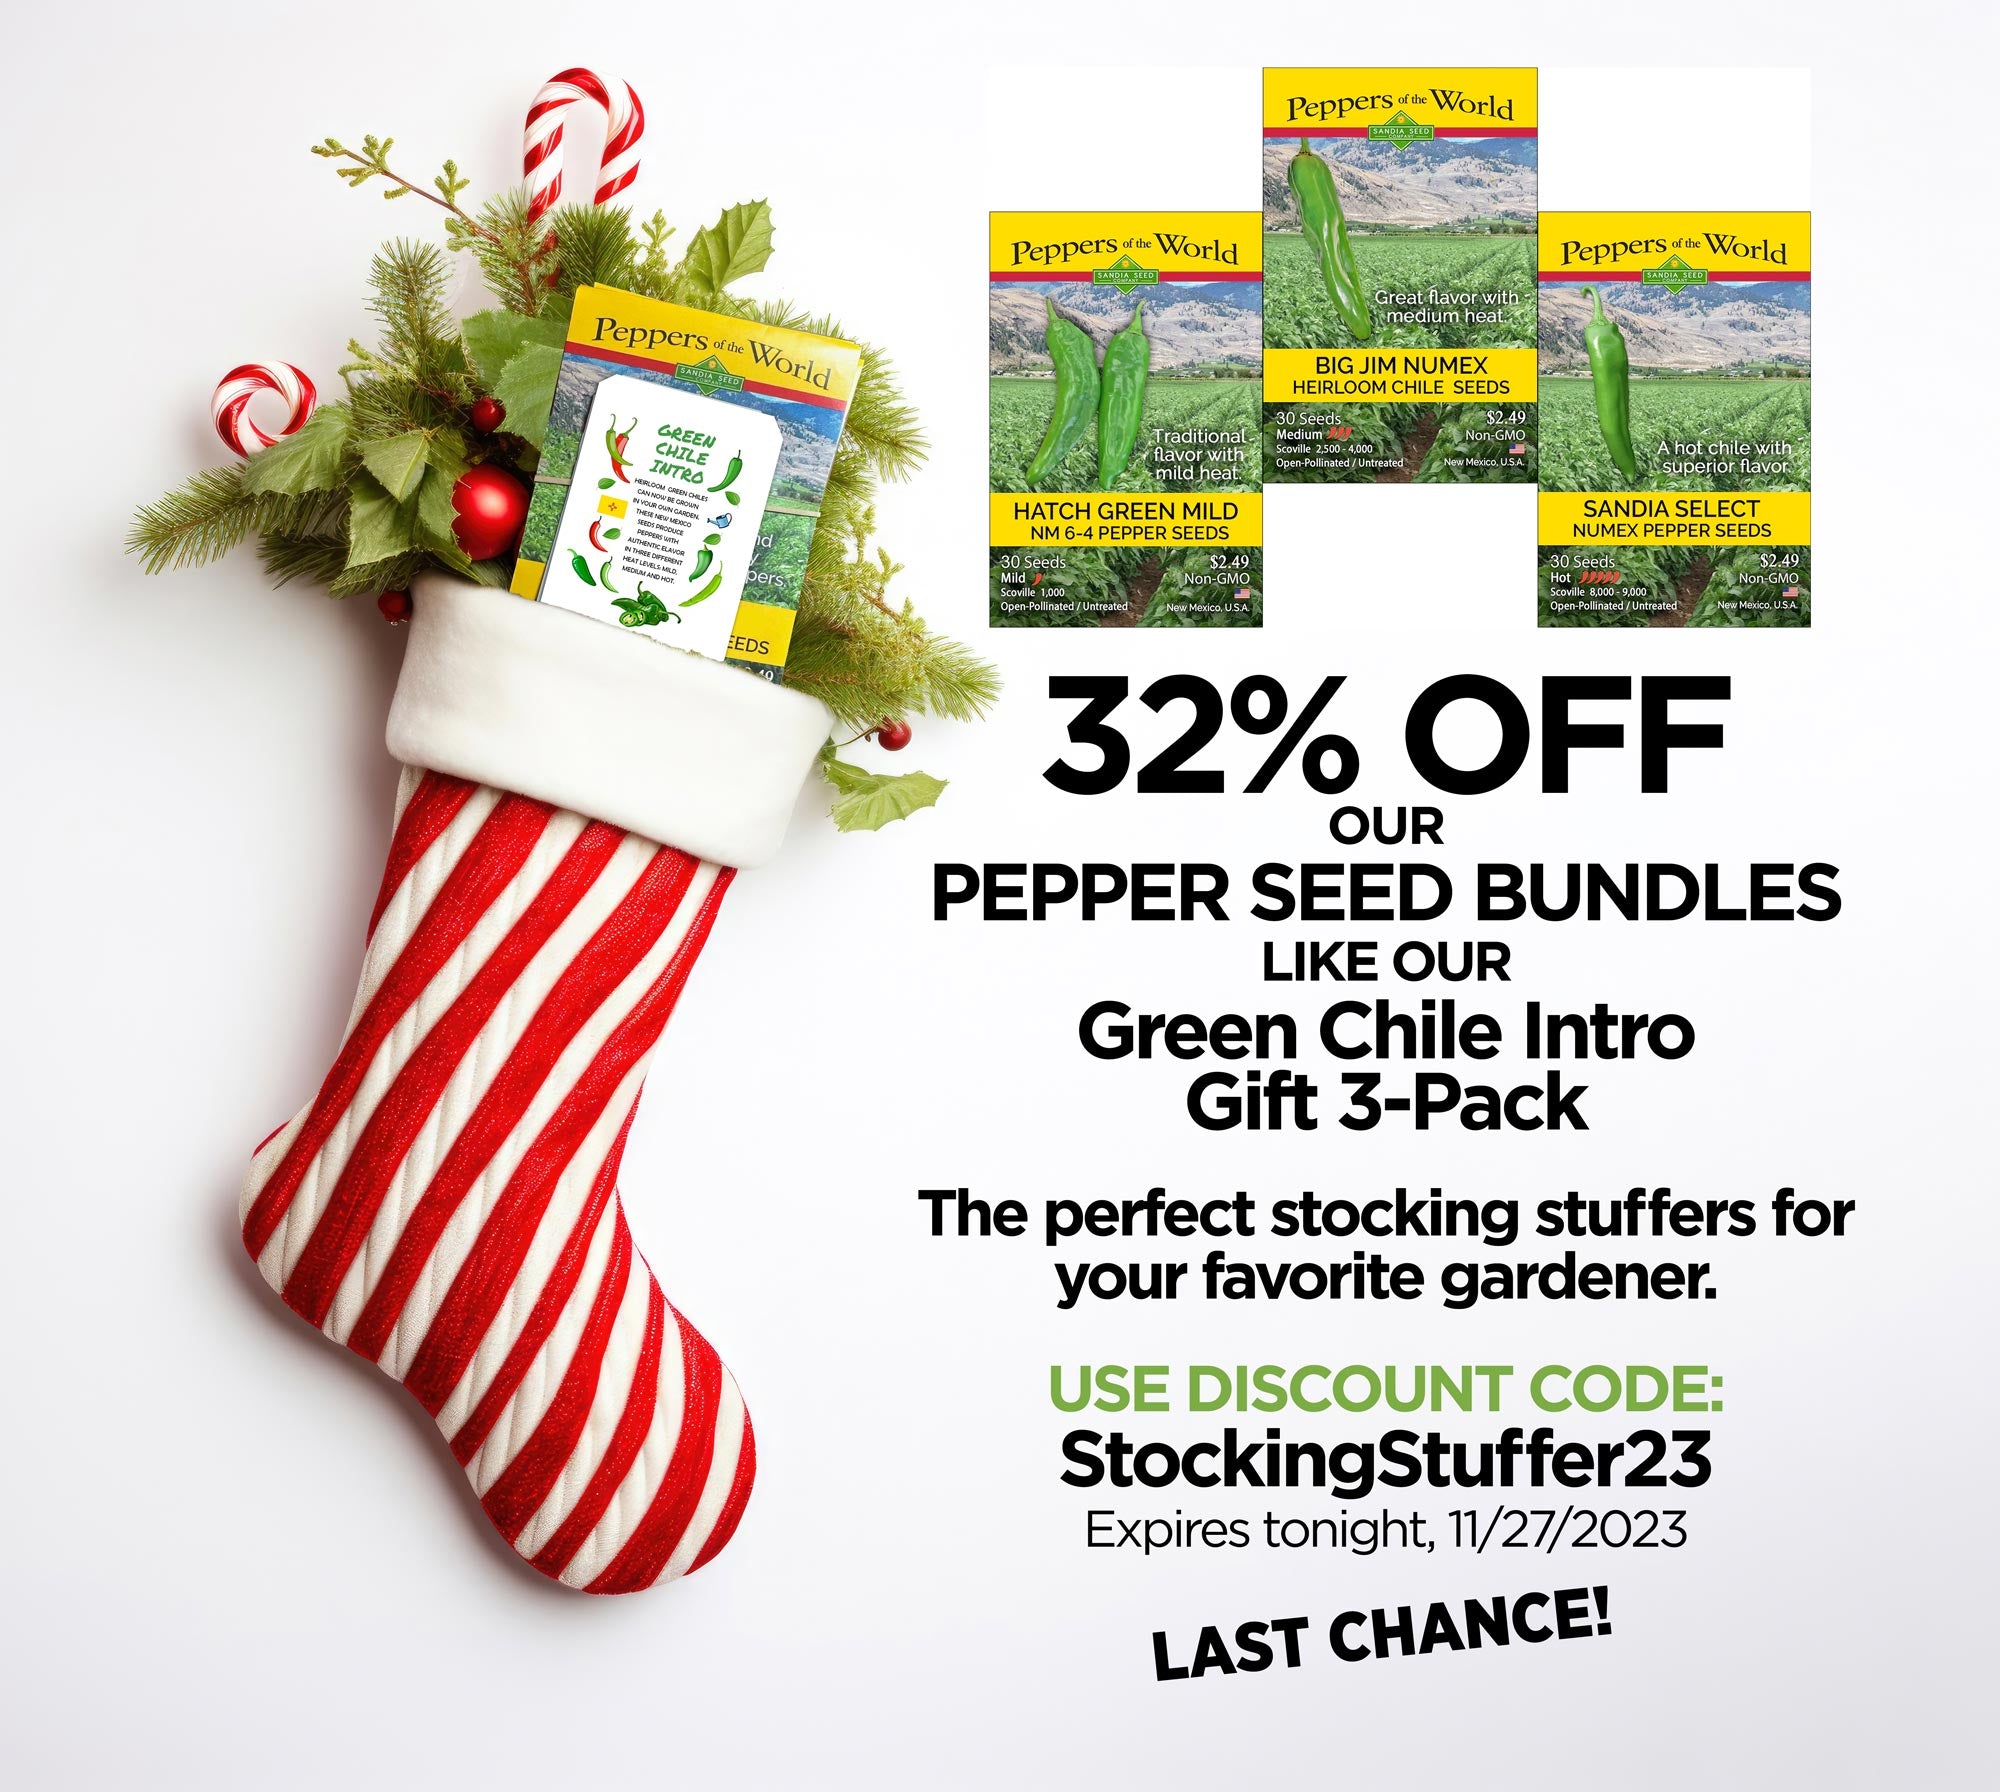 32% off our Pepper Seed Bundles with Discount Code: StockingStuffer23 - expires at midnight 11/27/2023